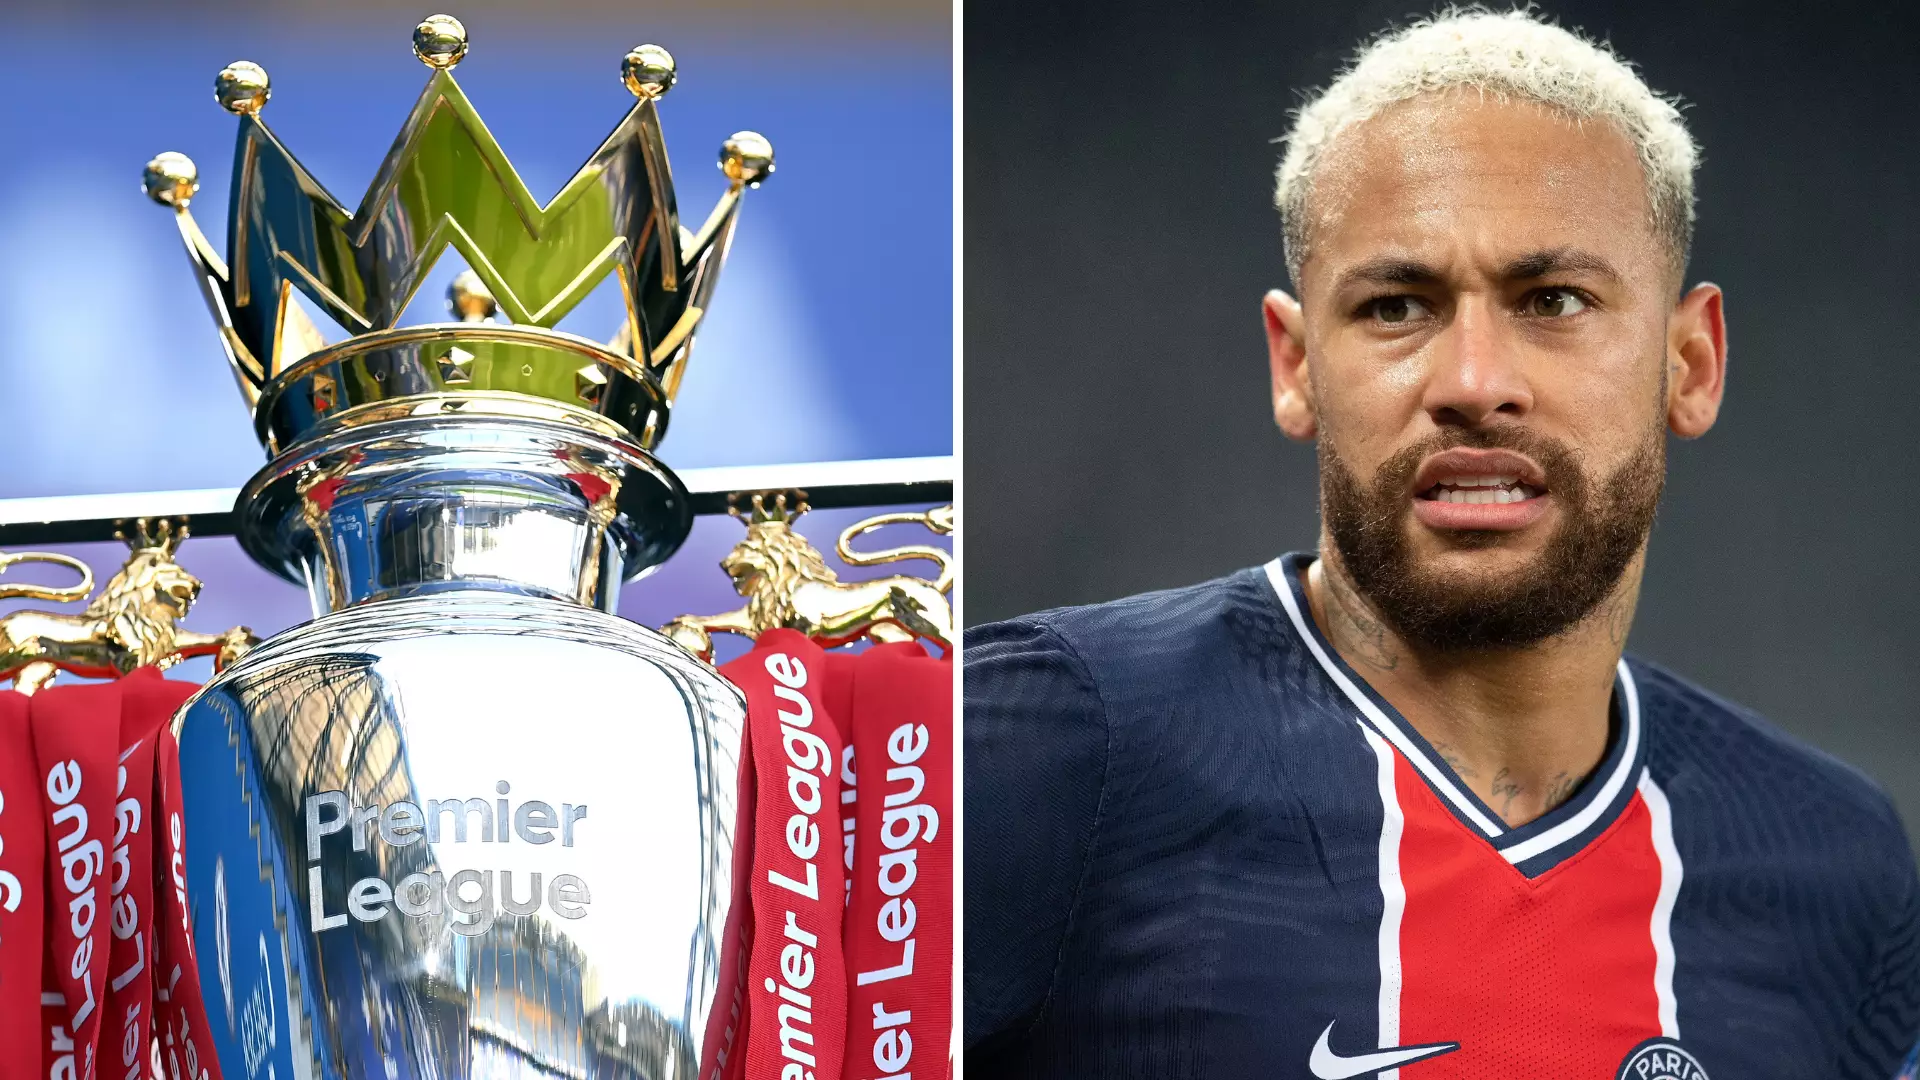 Neymar Reveals Why He Doesn’t Want A Premier League Move Ahead Of Signing New PSG Contract